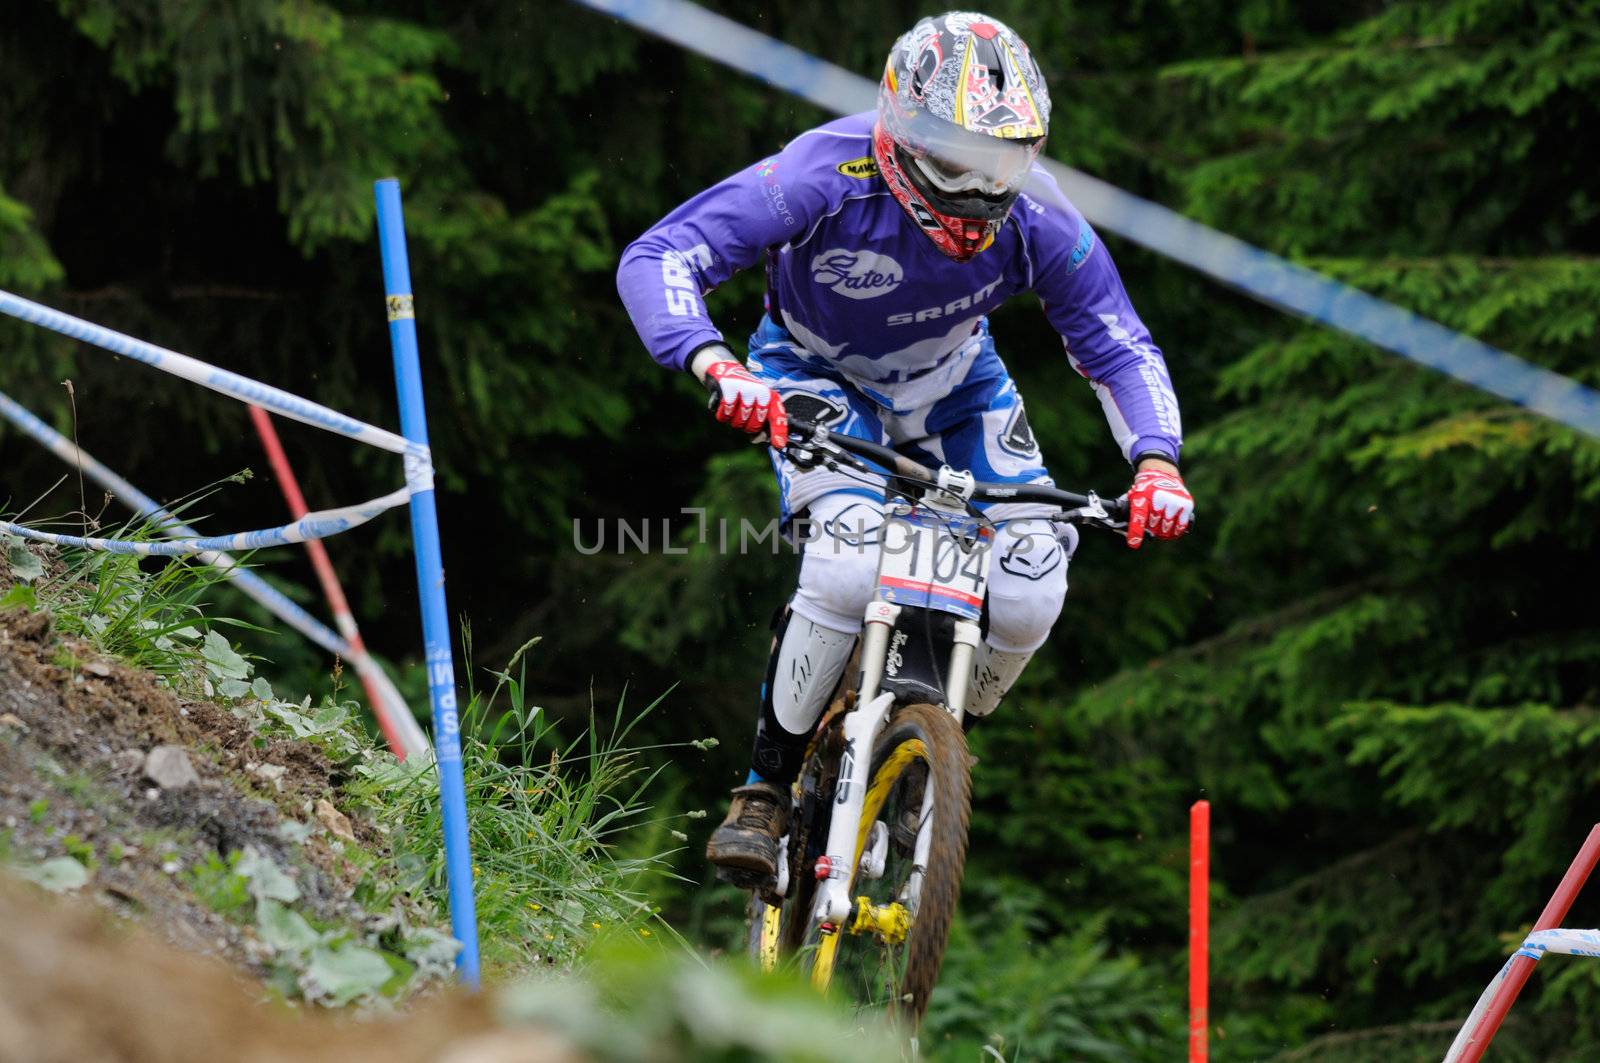 LEOGANG, AUSTRIA - JUN 12: UCI Mountain bike world cup. Participant at the downhill final race on June 12, 2011 in Leogang, Austria.
